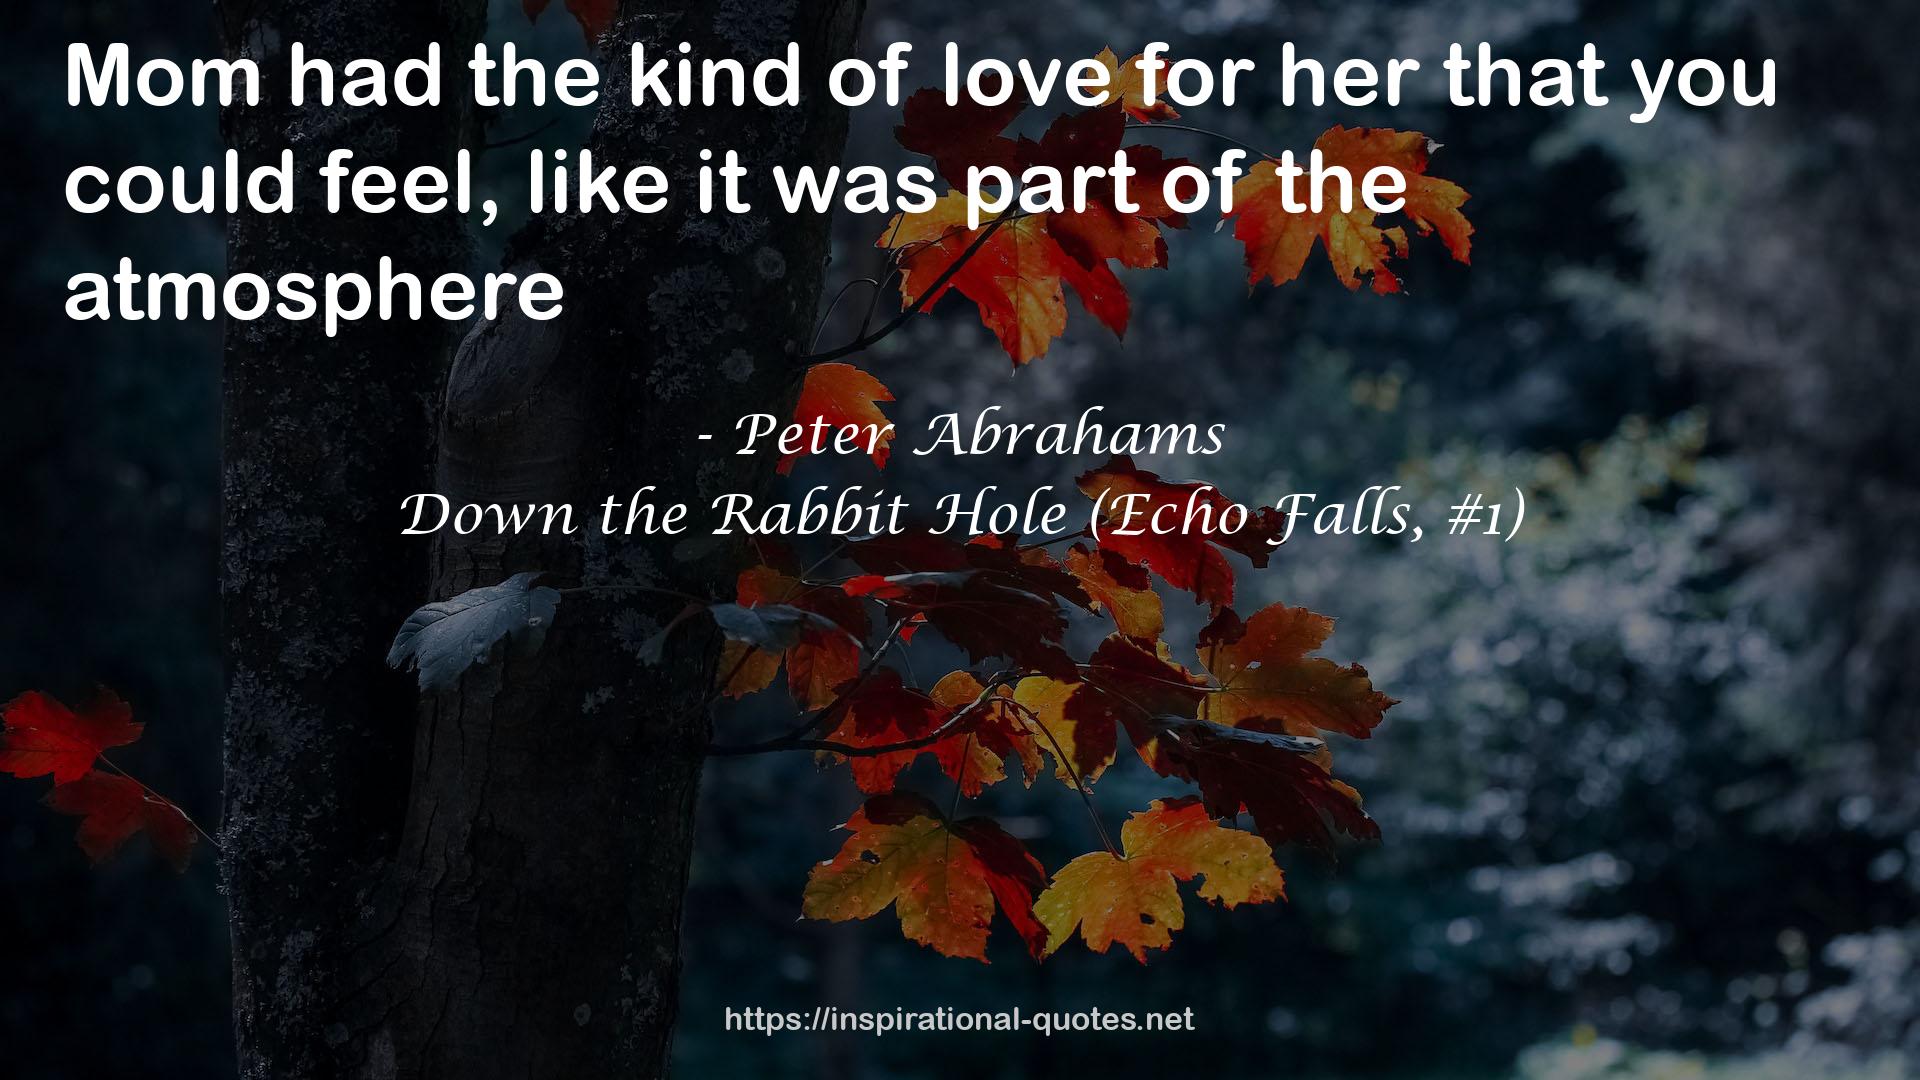 Peter Abrahams QUOTES